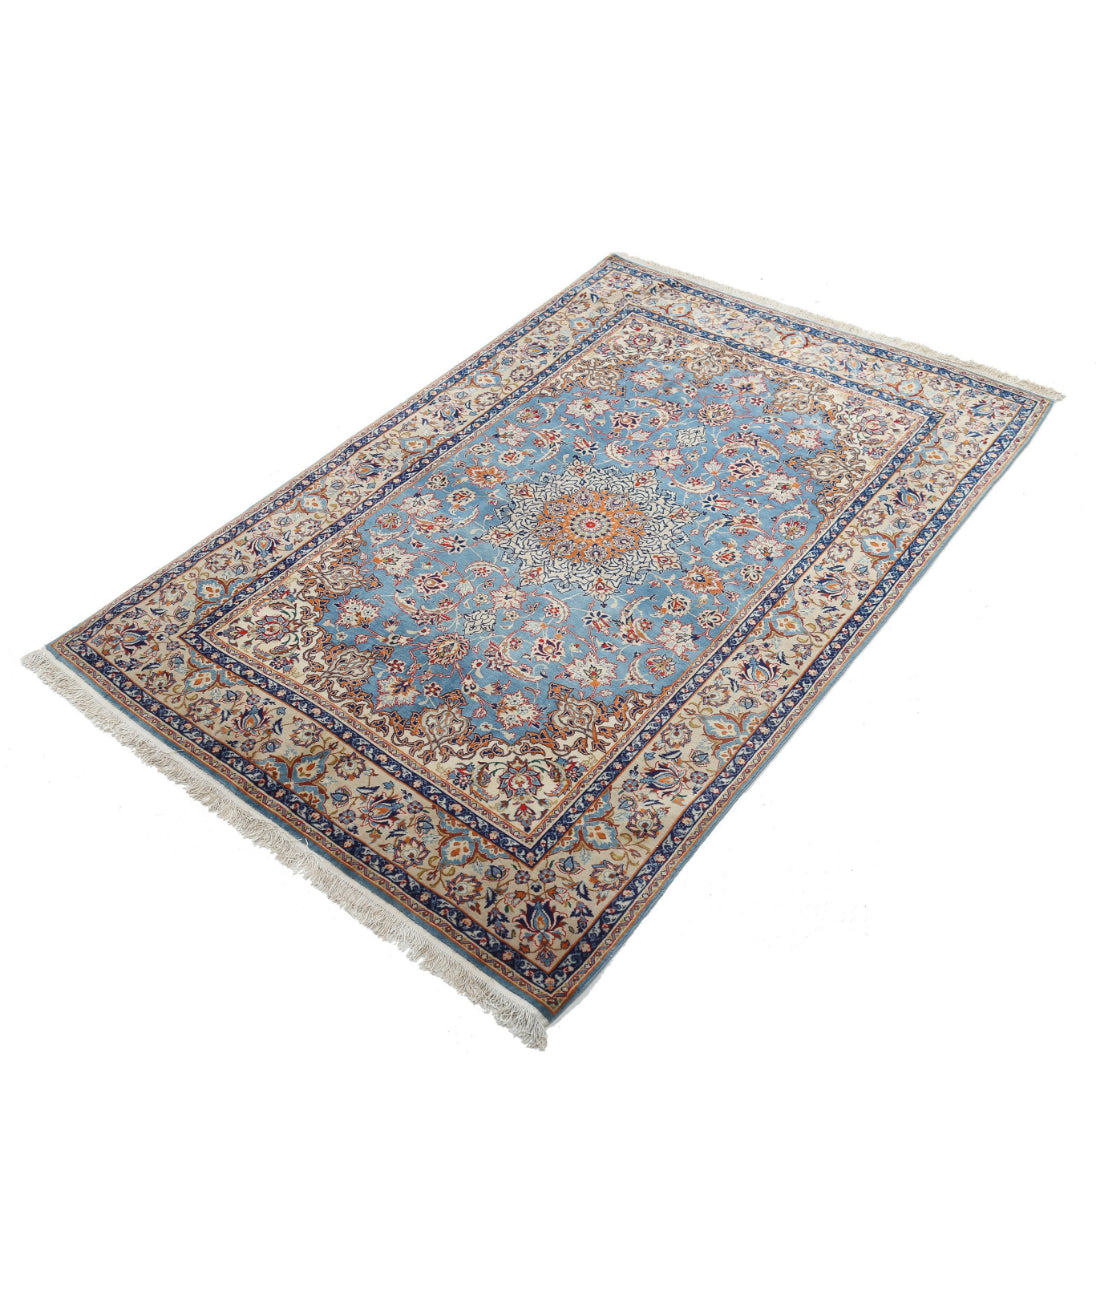 Hand Knotted Masterpiece Persian Isfahan Wool & Silk Rug - 3'6'' x 5'4'' 3'6'' x 5'4'' (105 X 160) / Blue / Beige